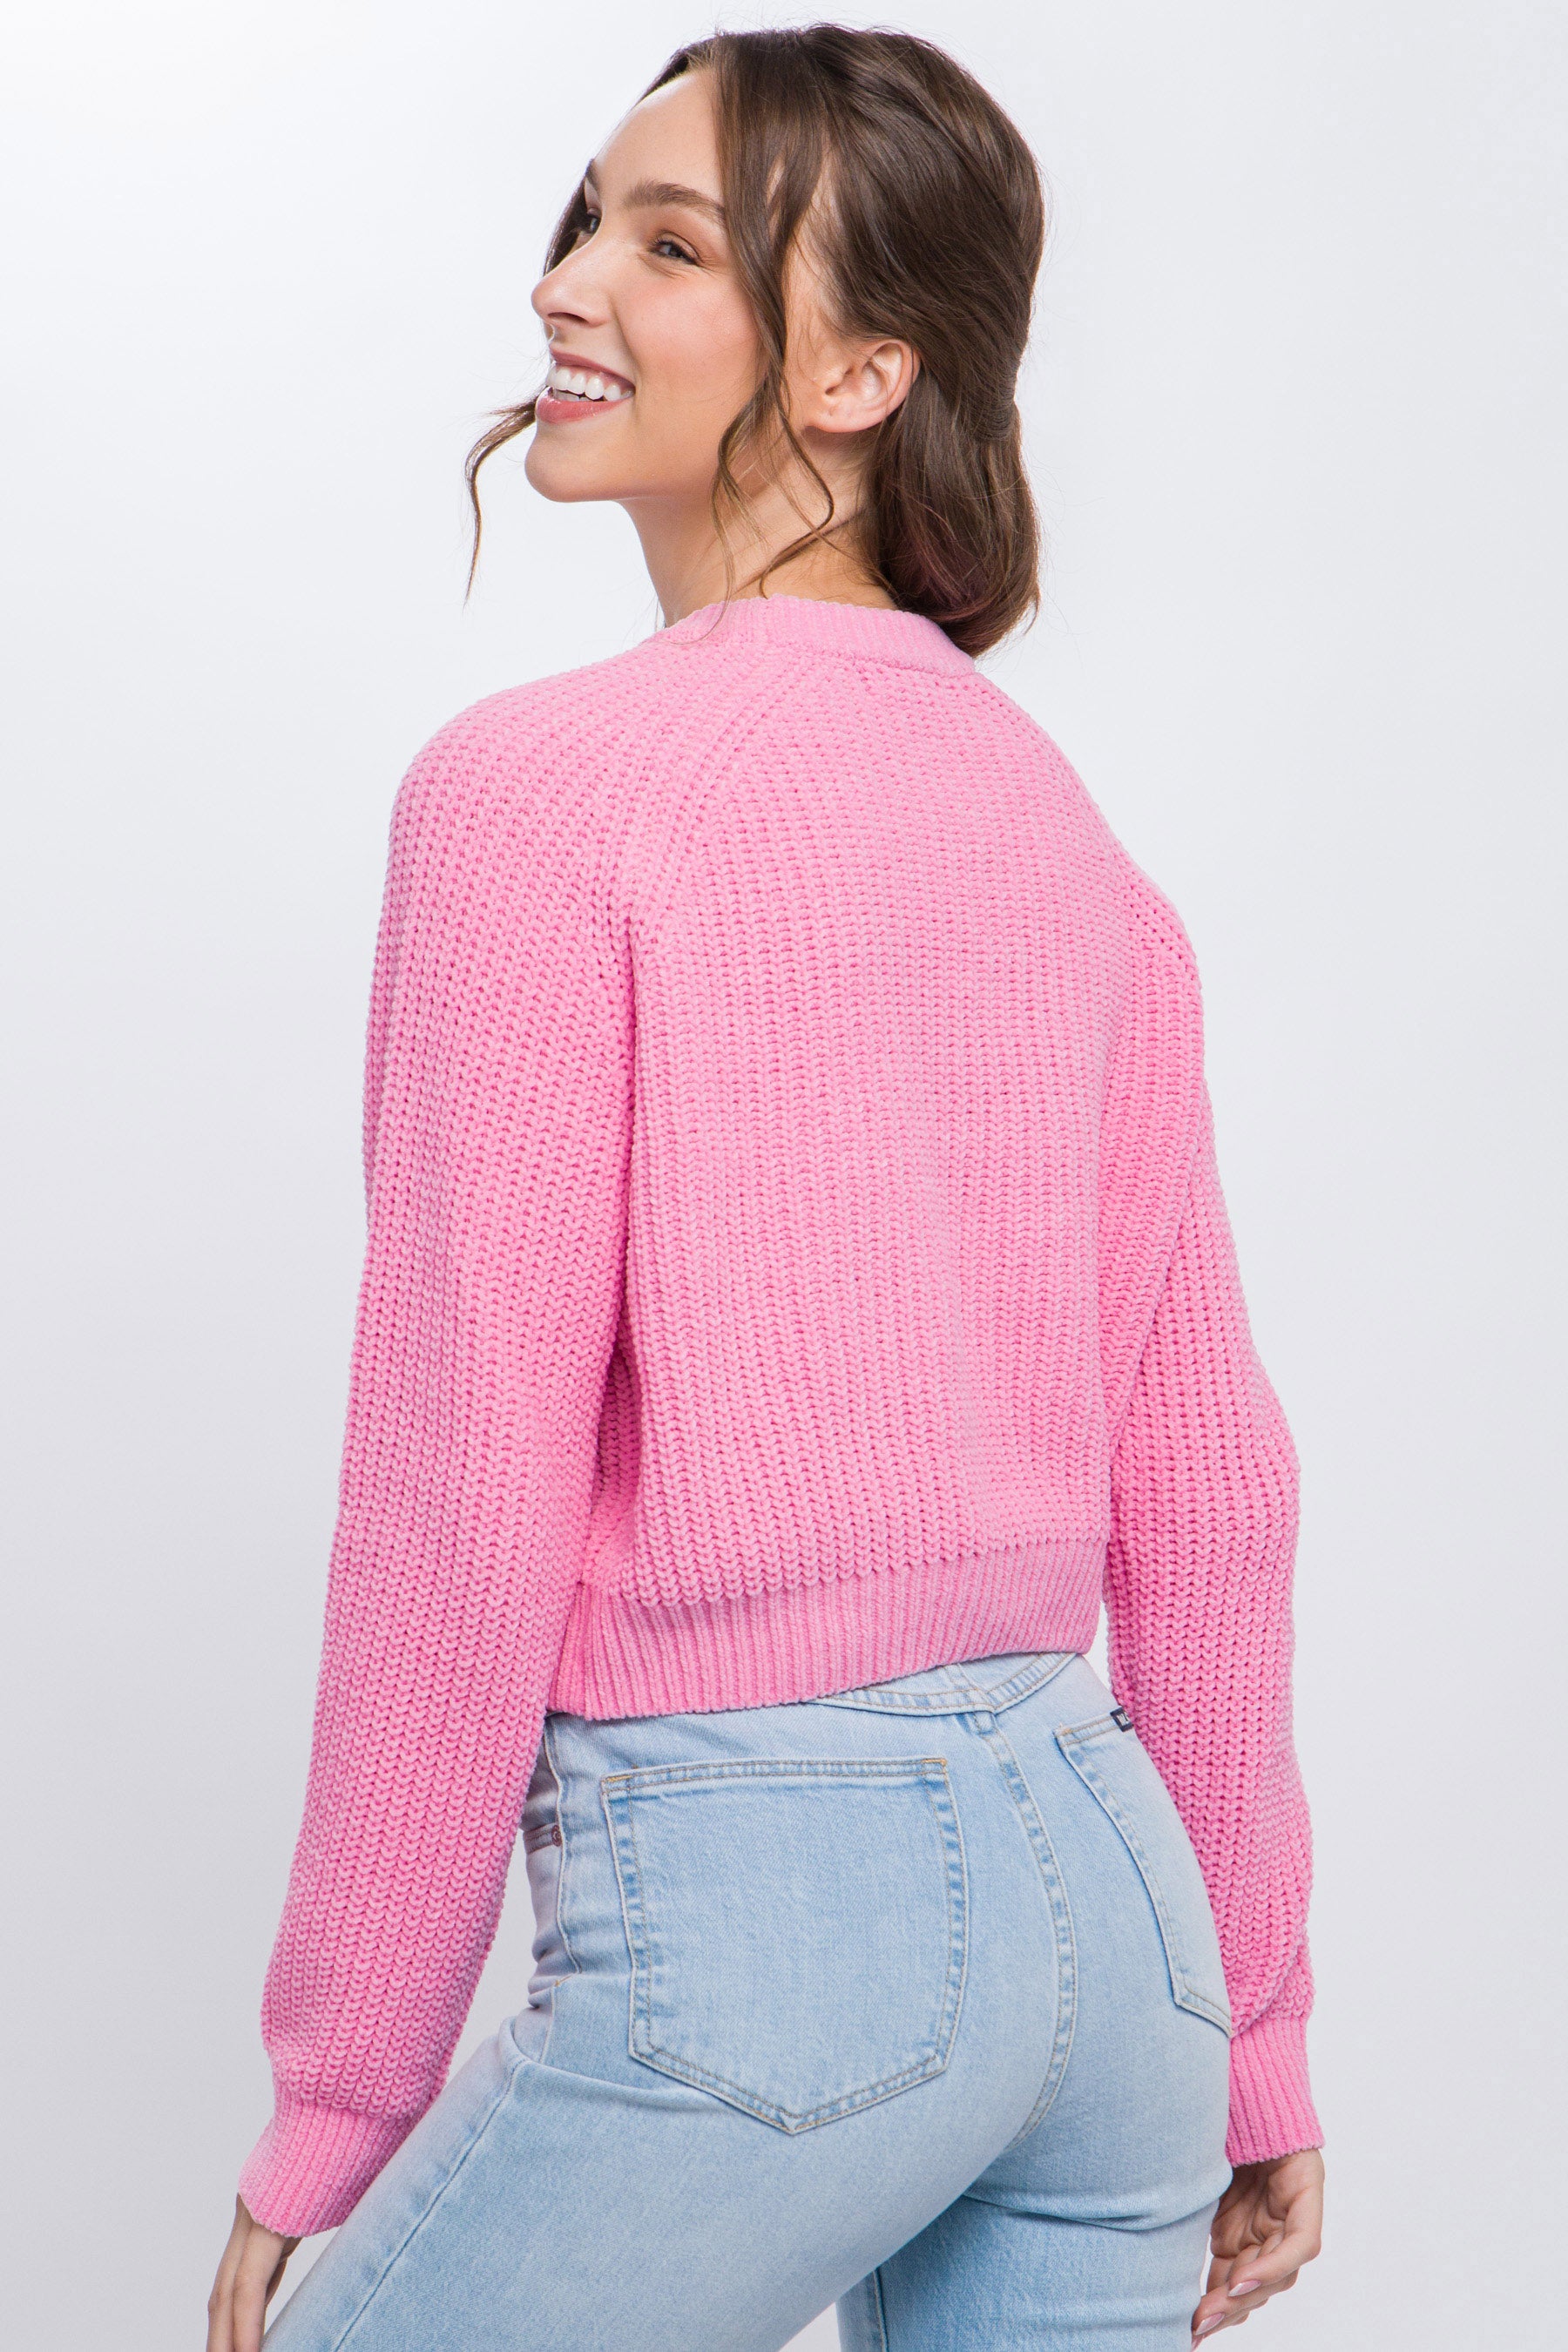 Knit Pullover Sweater With Cold Shoulder Detail.